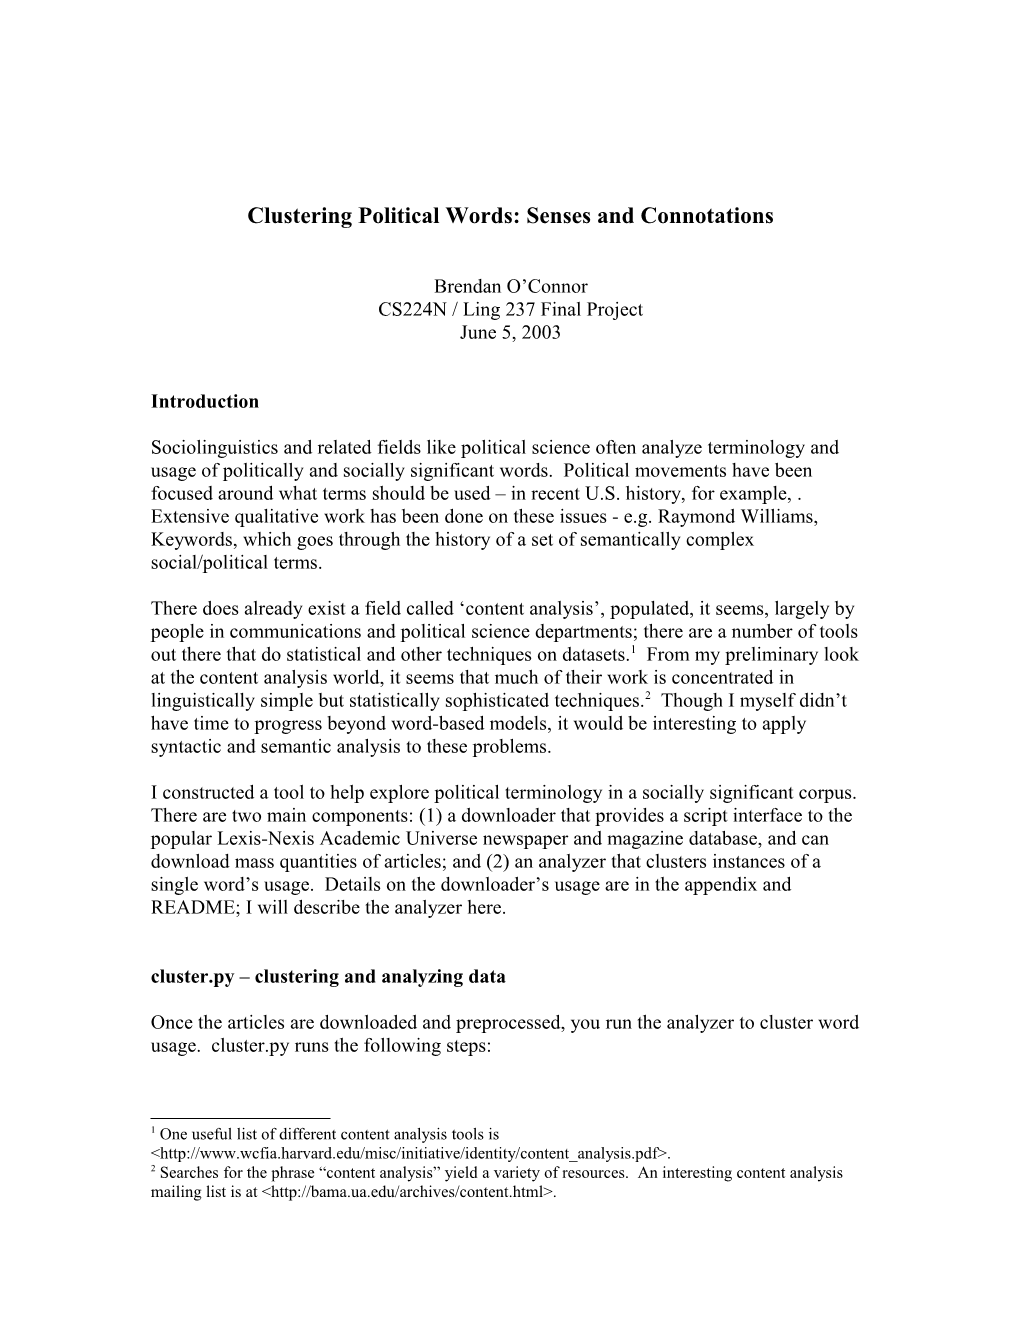 Clustering Political Words: Senses and Connotations